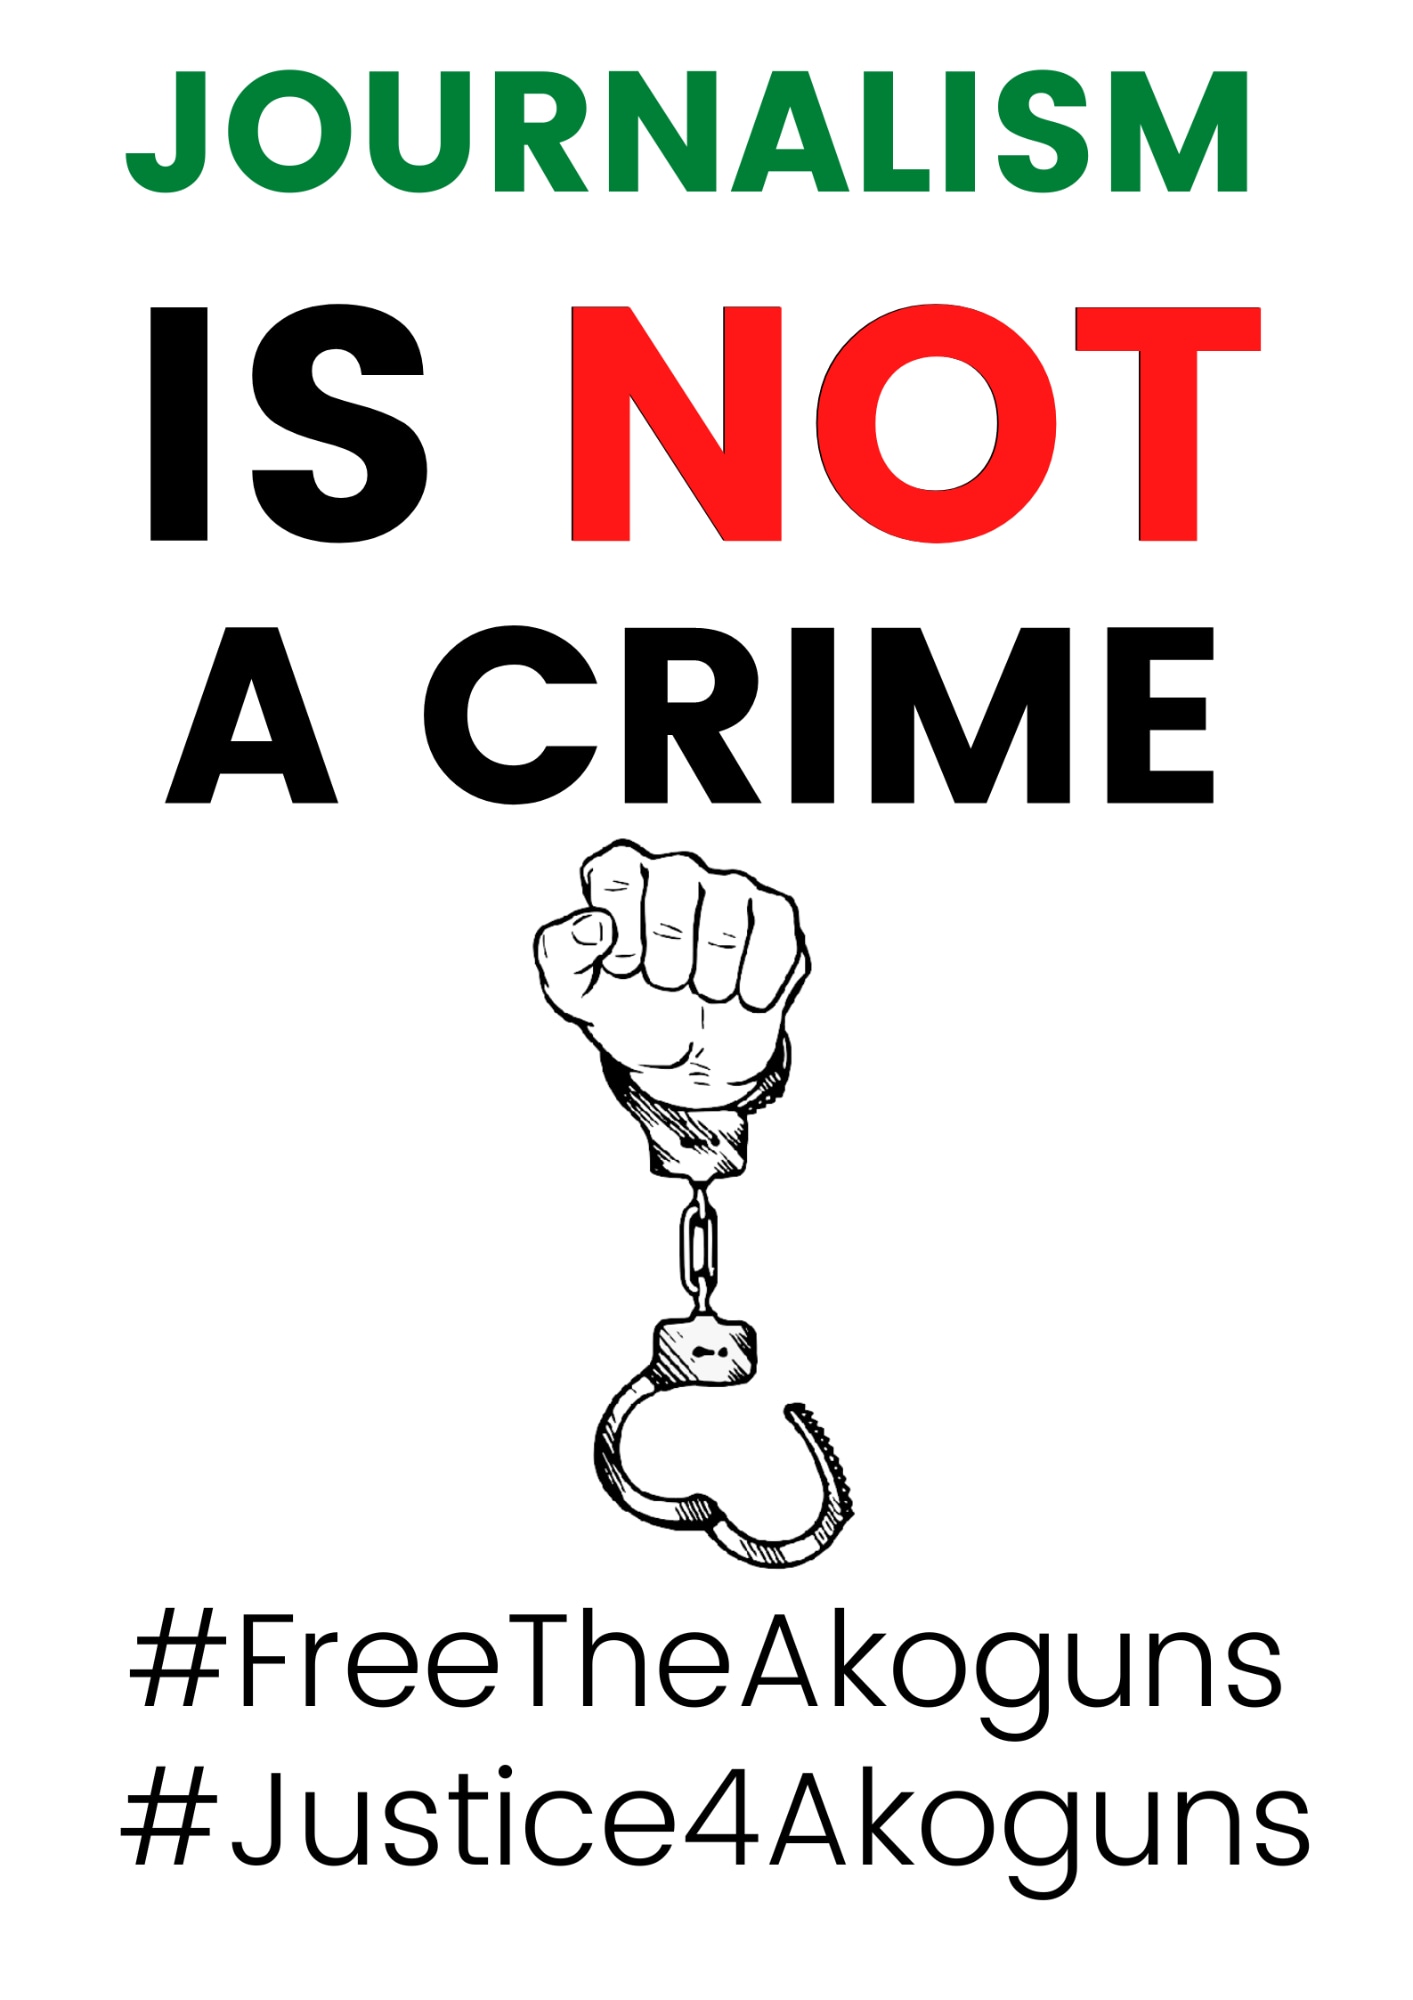 Plan to infiltrate #FreeTheAkoguns protest exposed, as organizers suspends solidarity walk